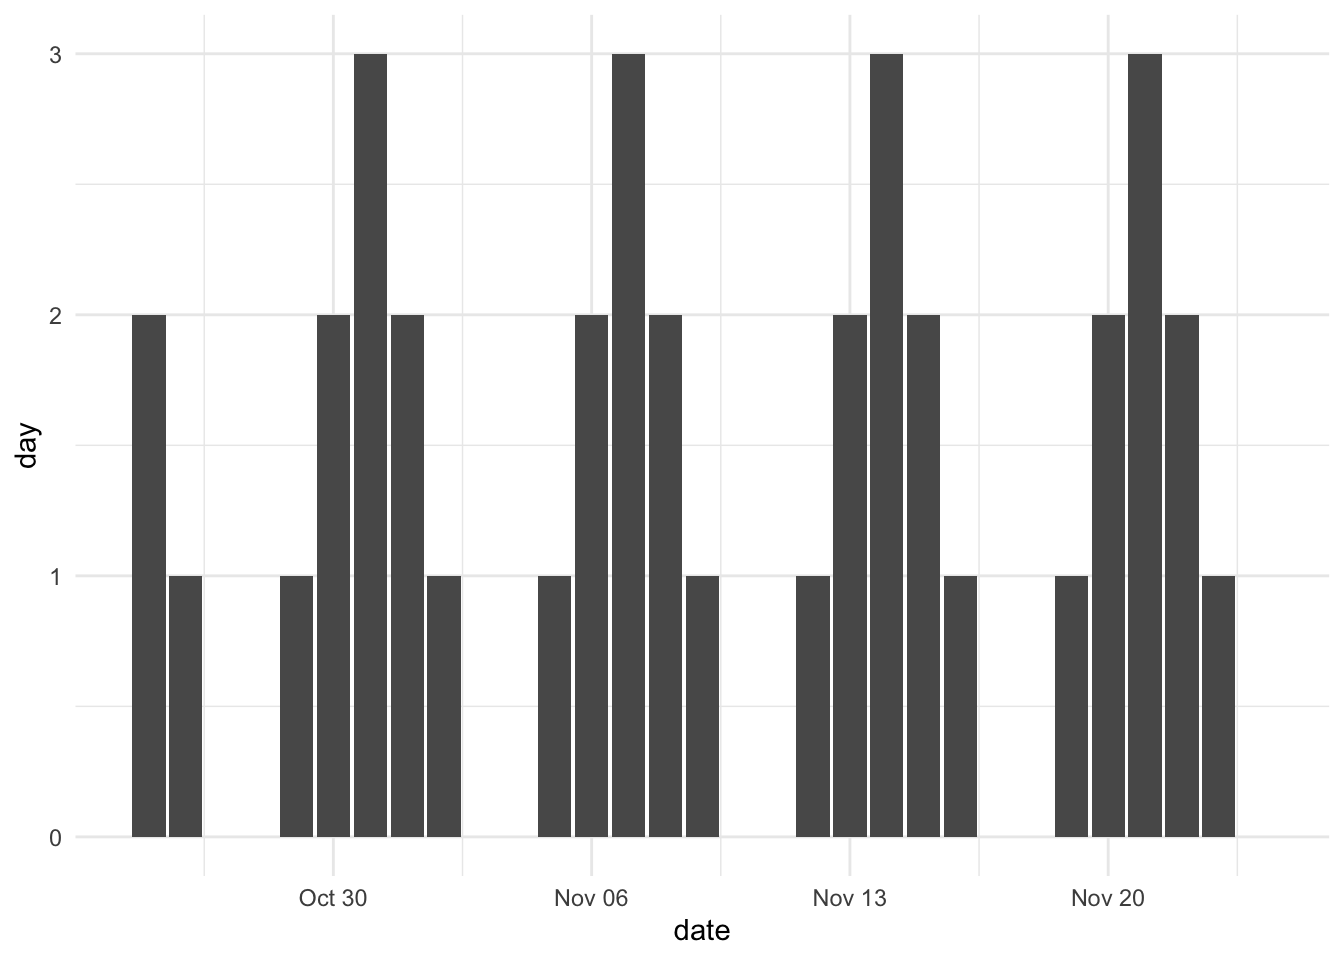 Bar chart. Dates along the x-axis, numeric effect along the y-axis. Values are zero for both Saturdays and Sundays. 1 for Mondays and Fridays, 2 for Tuesdays and Thursdays, and 3 for Wednesdays.